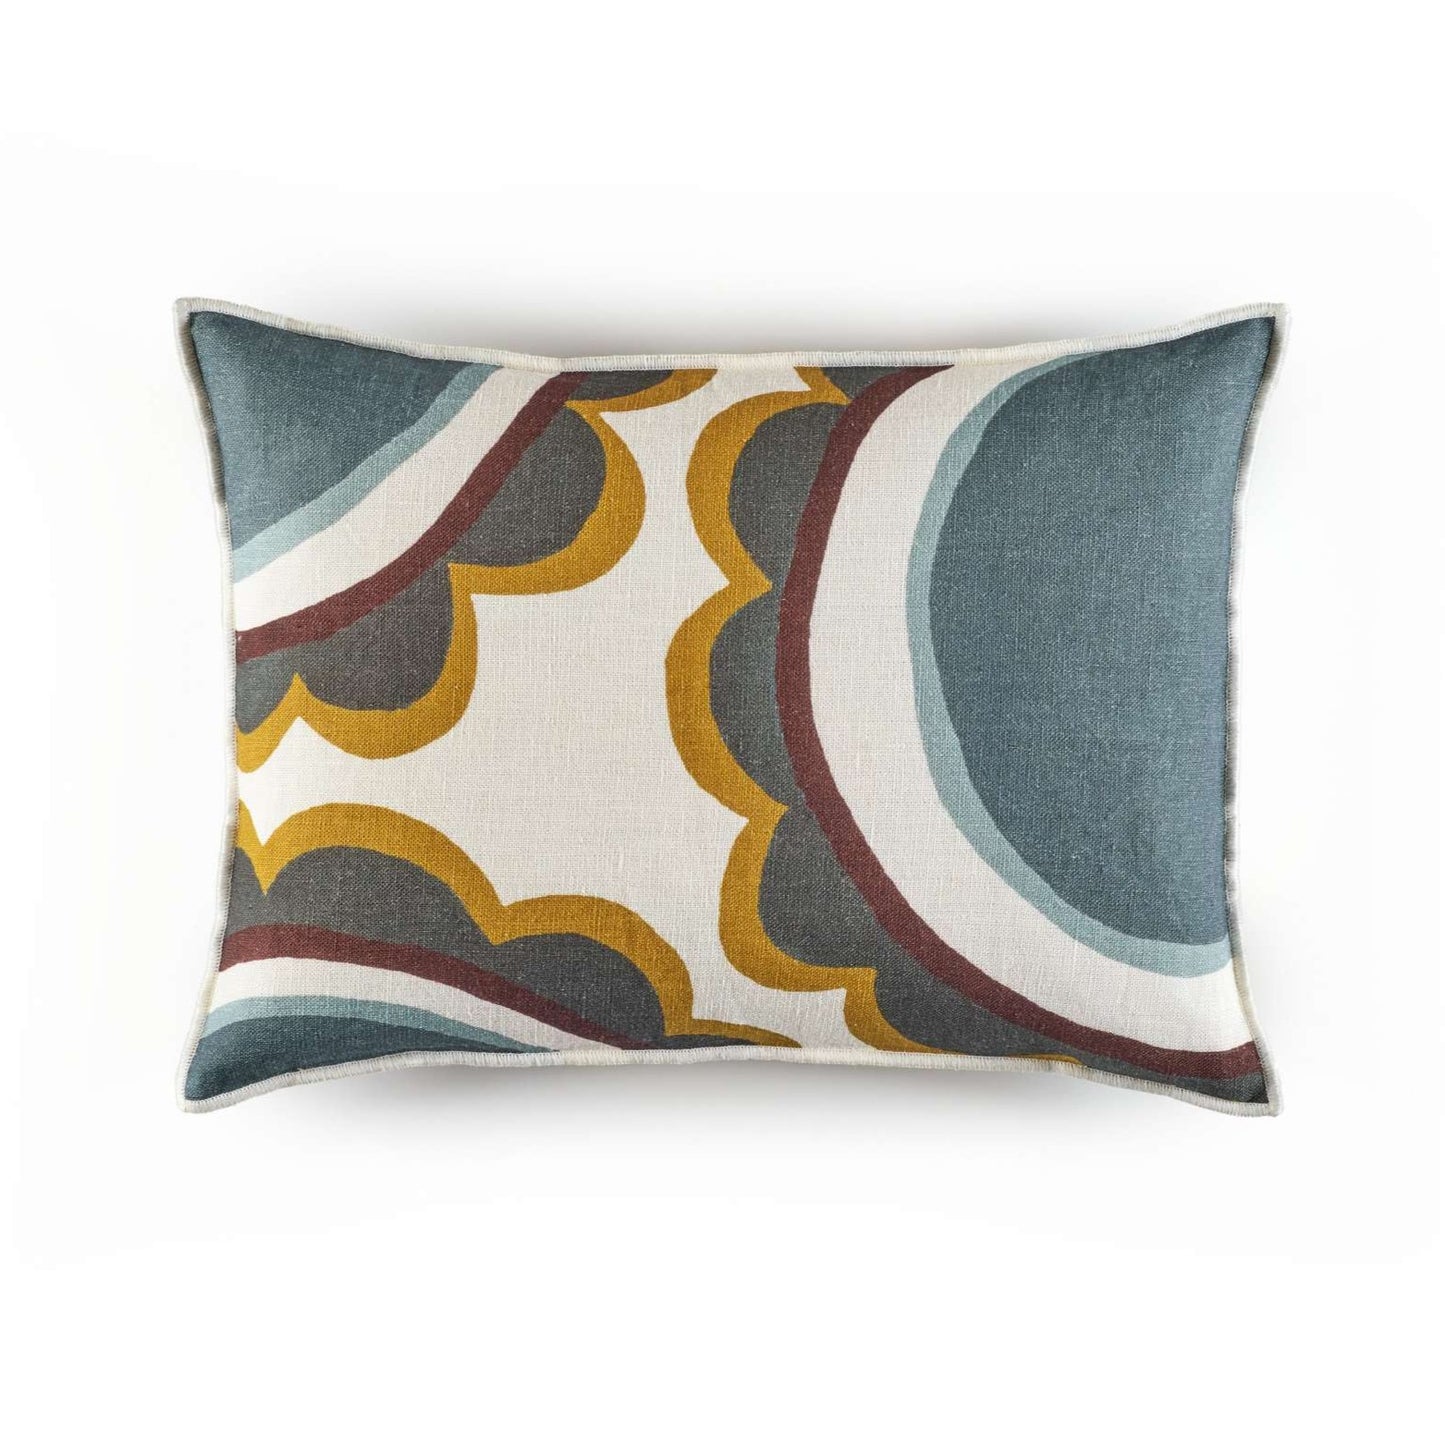 Marguerite cushion in blue, brown, mustard and white